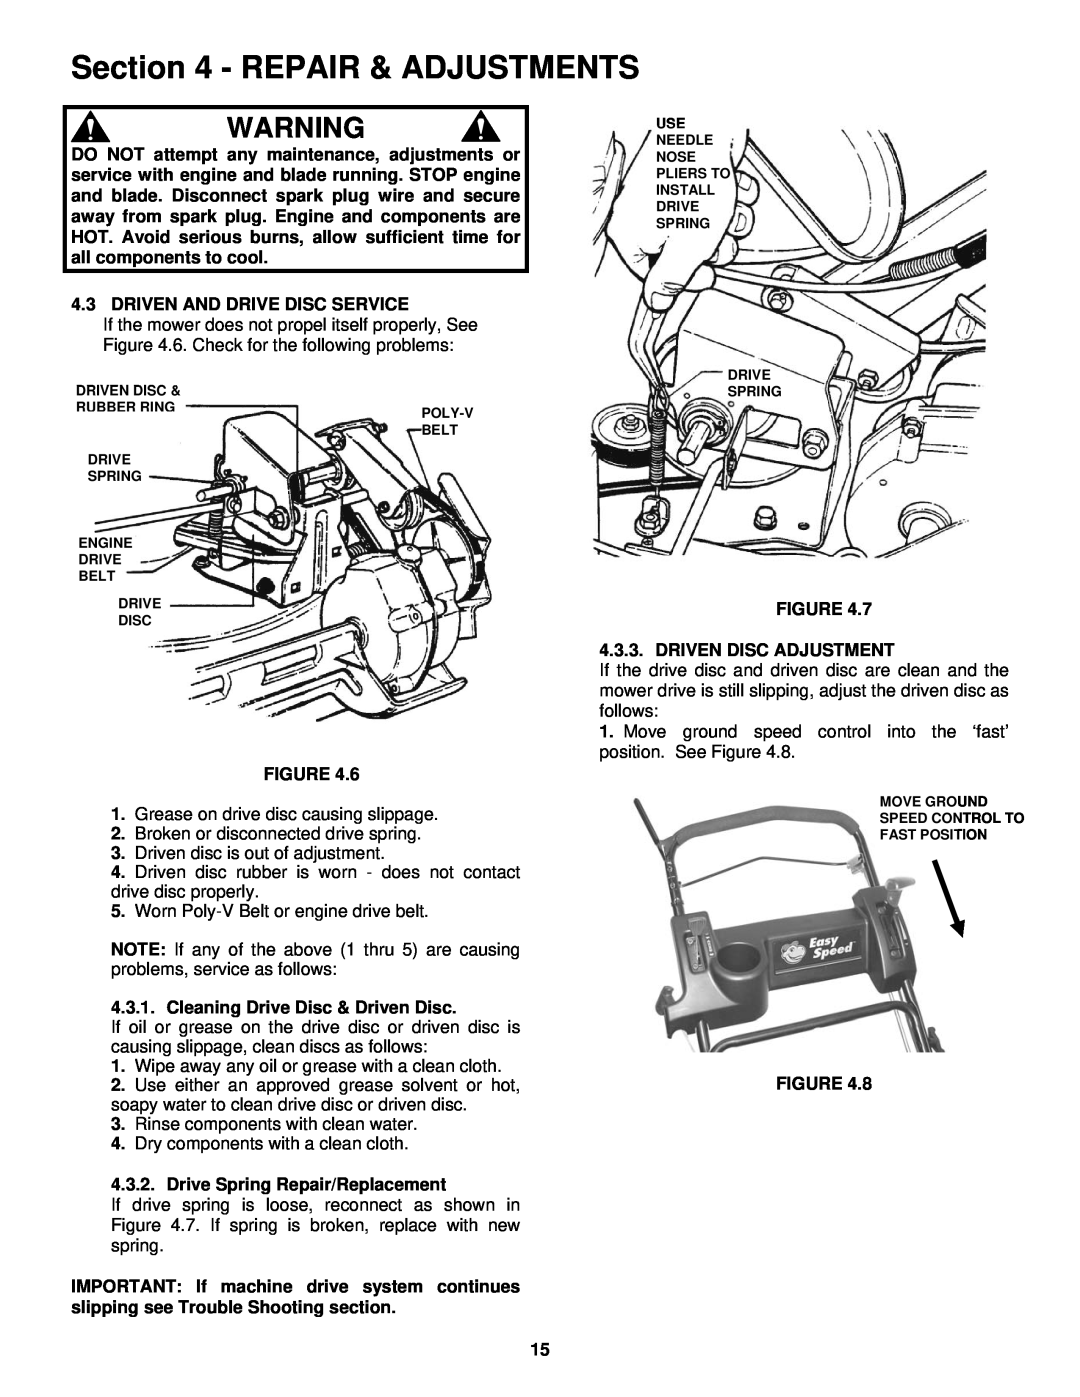 Snapper RP2167519BDV important safety instructions Repair & Adjustments, Driven And Drive Disc Service 